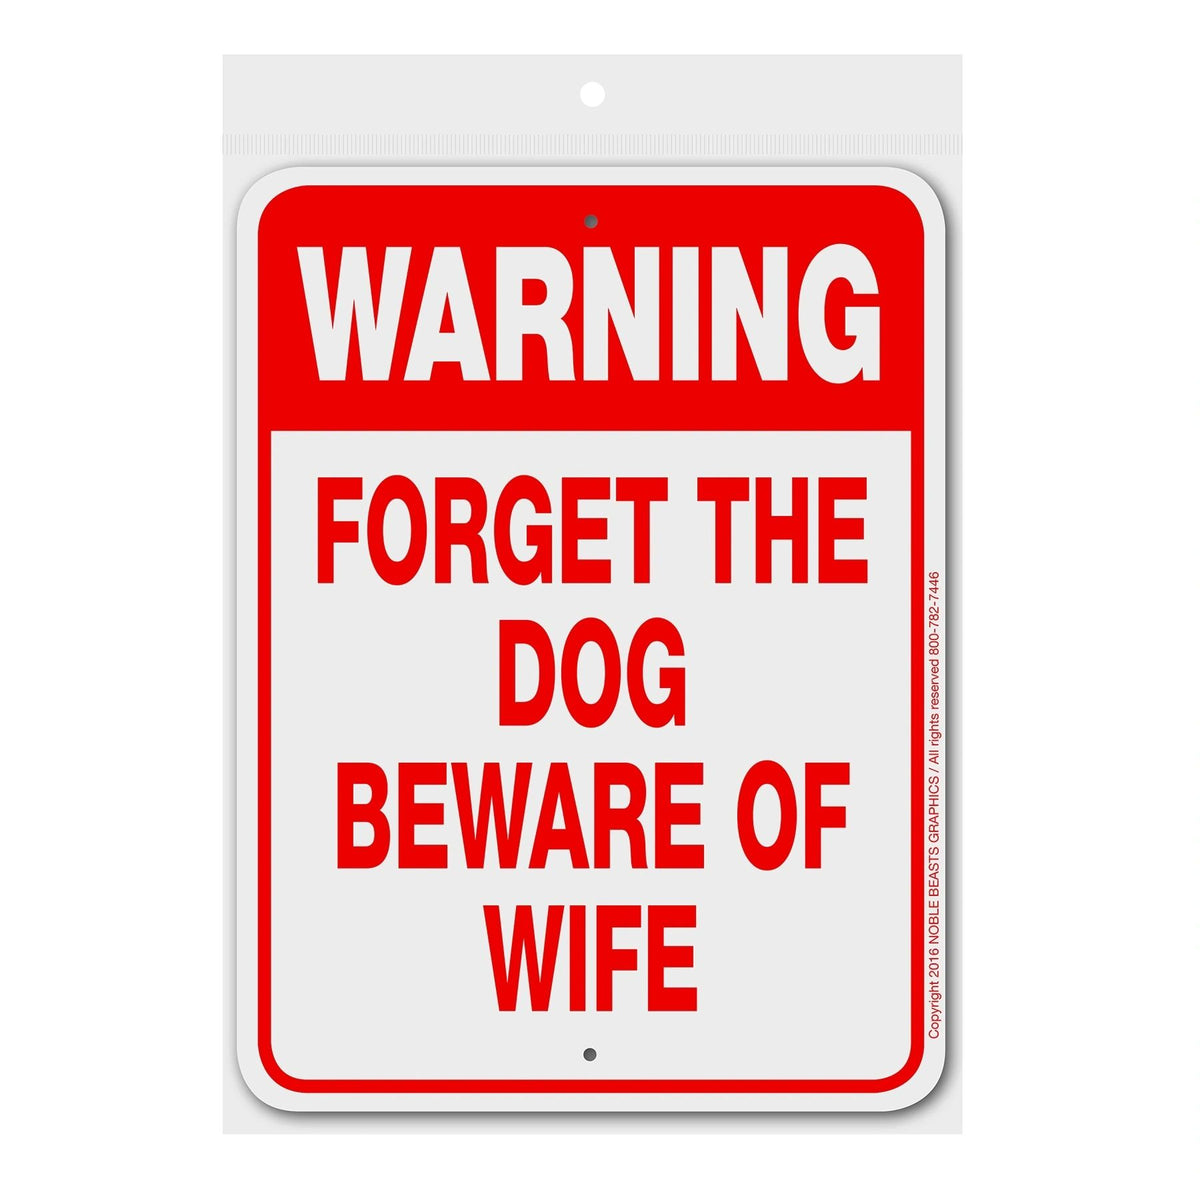 Warning Forget the Dog Beware of Wife Sign Aluminum 9 in X 12 in #3245379